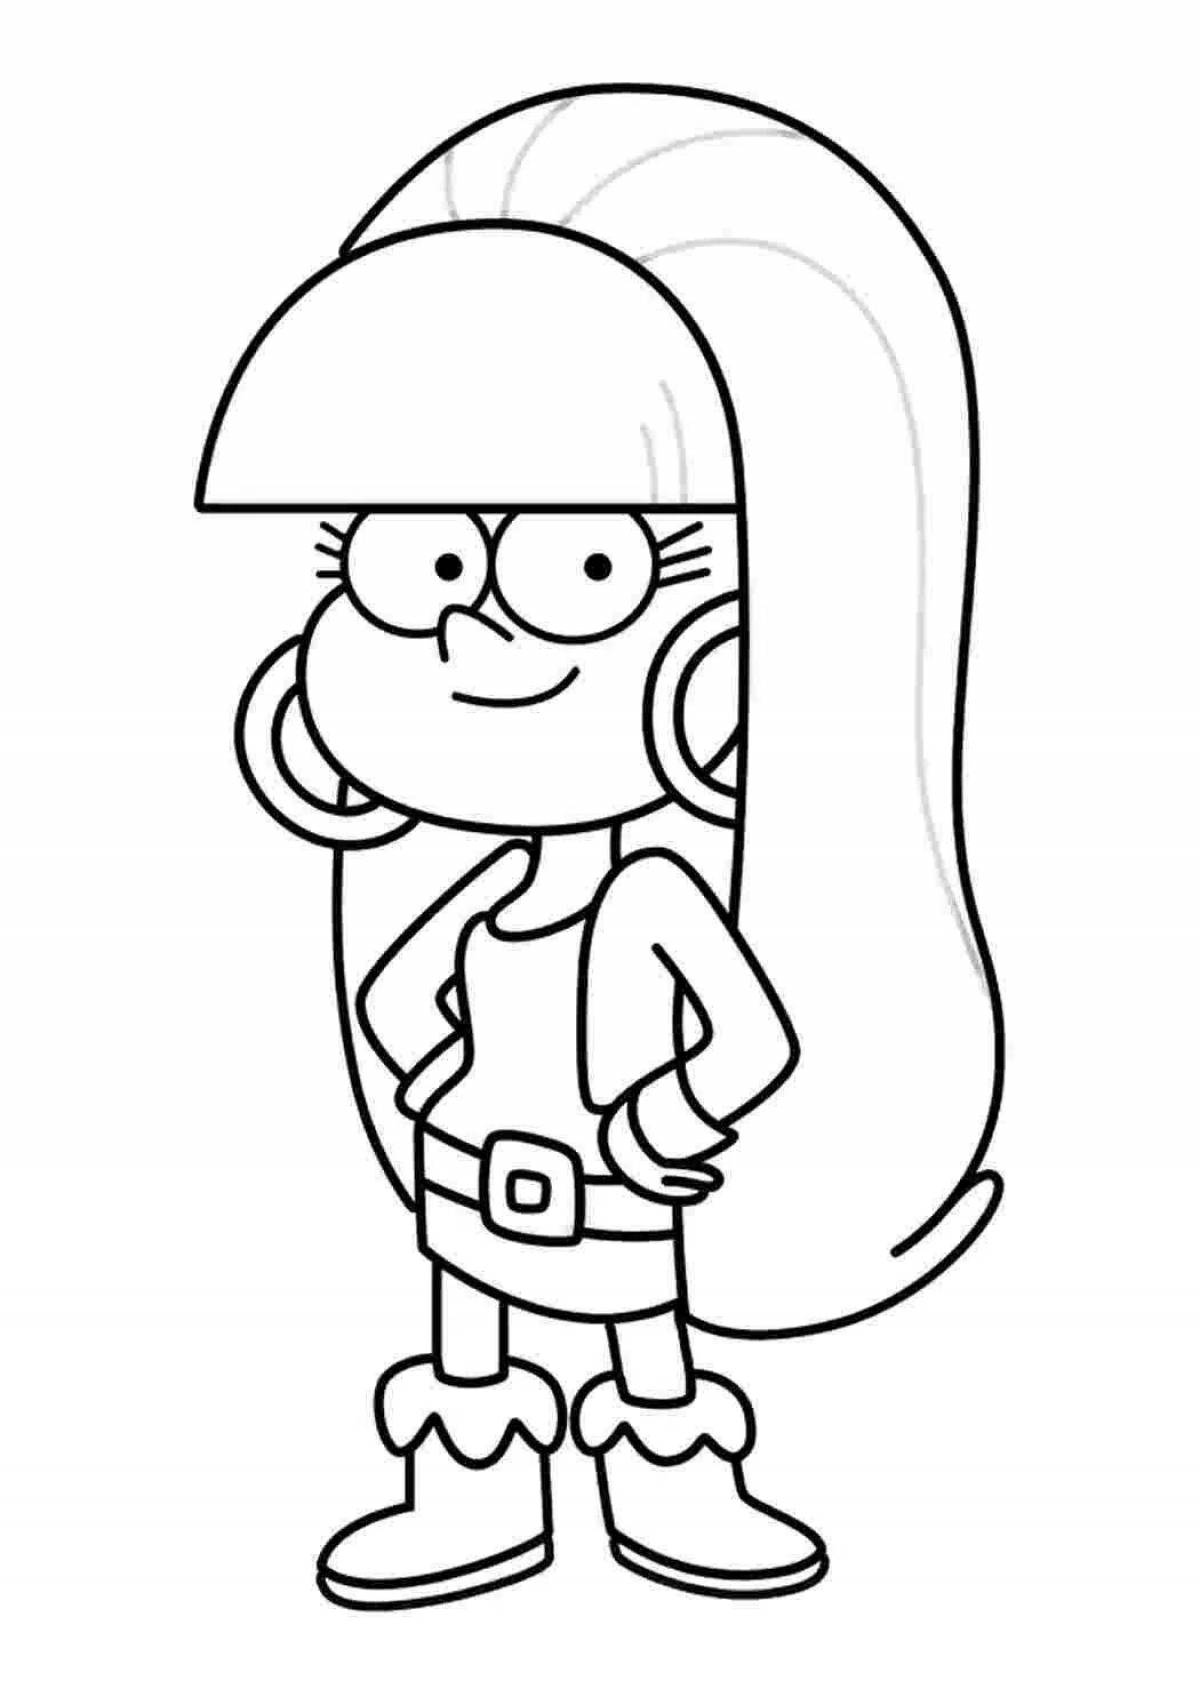 Dipper's incredible coloring page